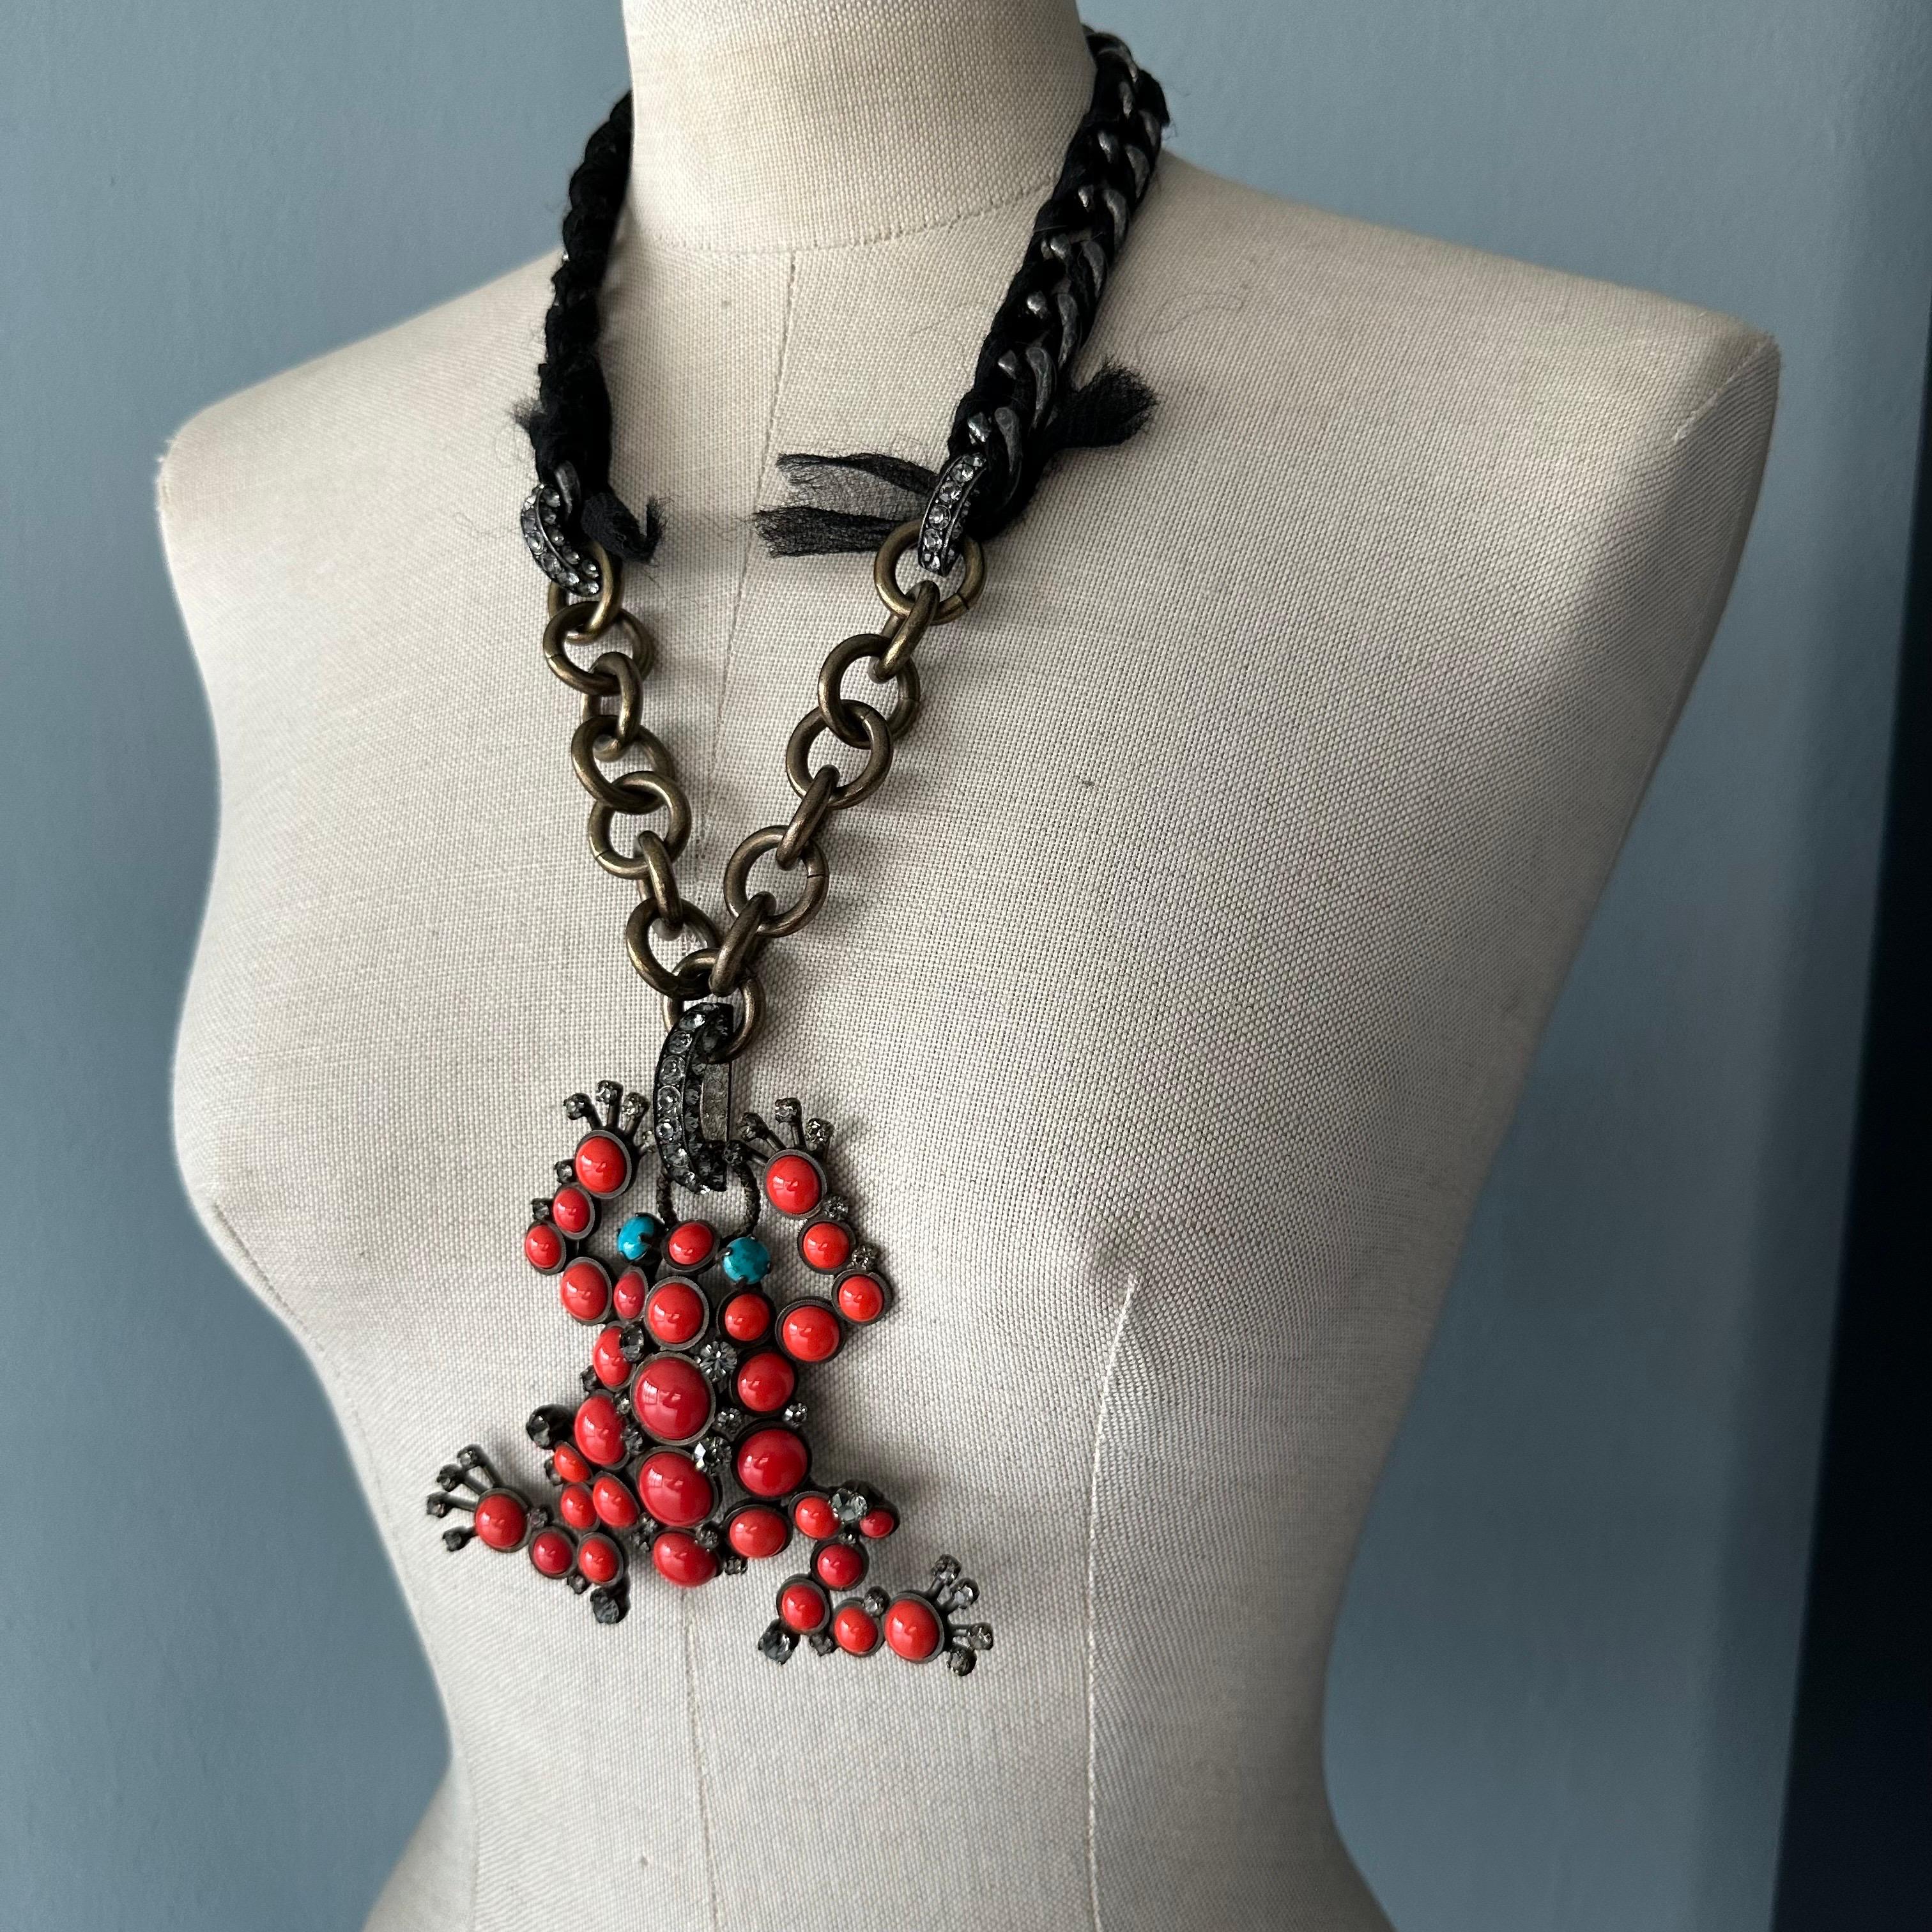 Rare necklace  Lanvin with pendant, chain and fabric choker. 
The pendant is' represented by a frog composed of coral-colored stones, turquoise and rhinestones. 
Ring closure, perfect condition 
The showy frog is about 10cm high
